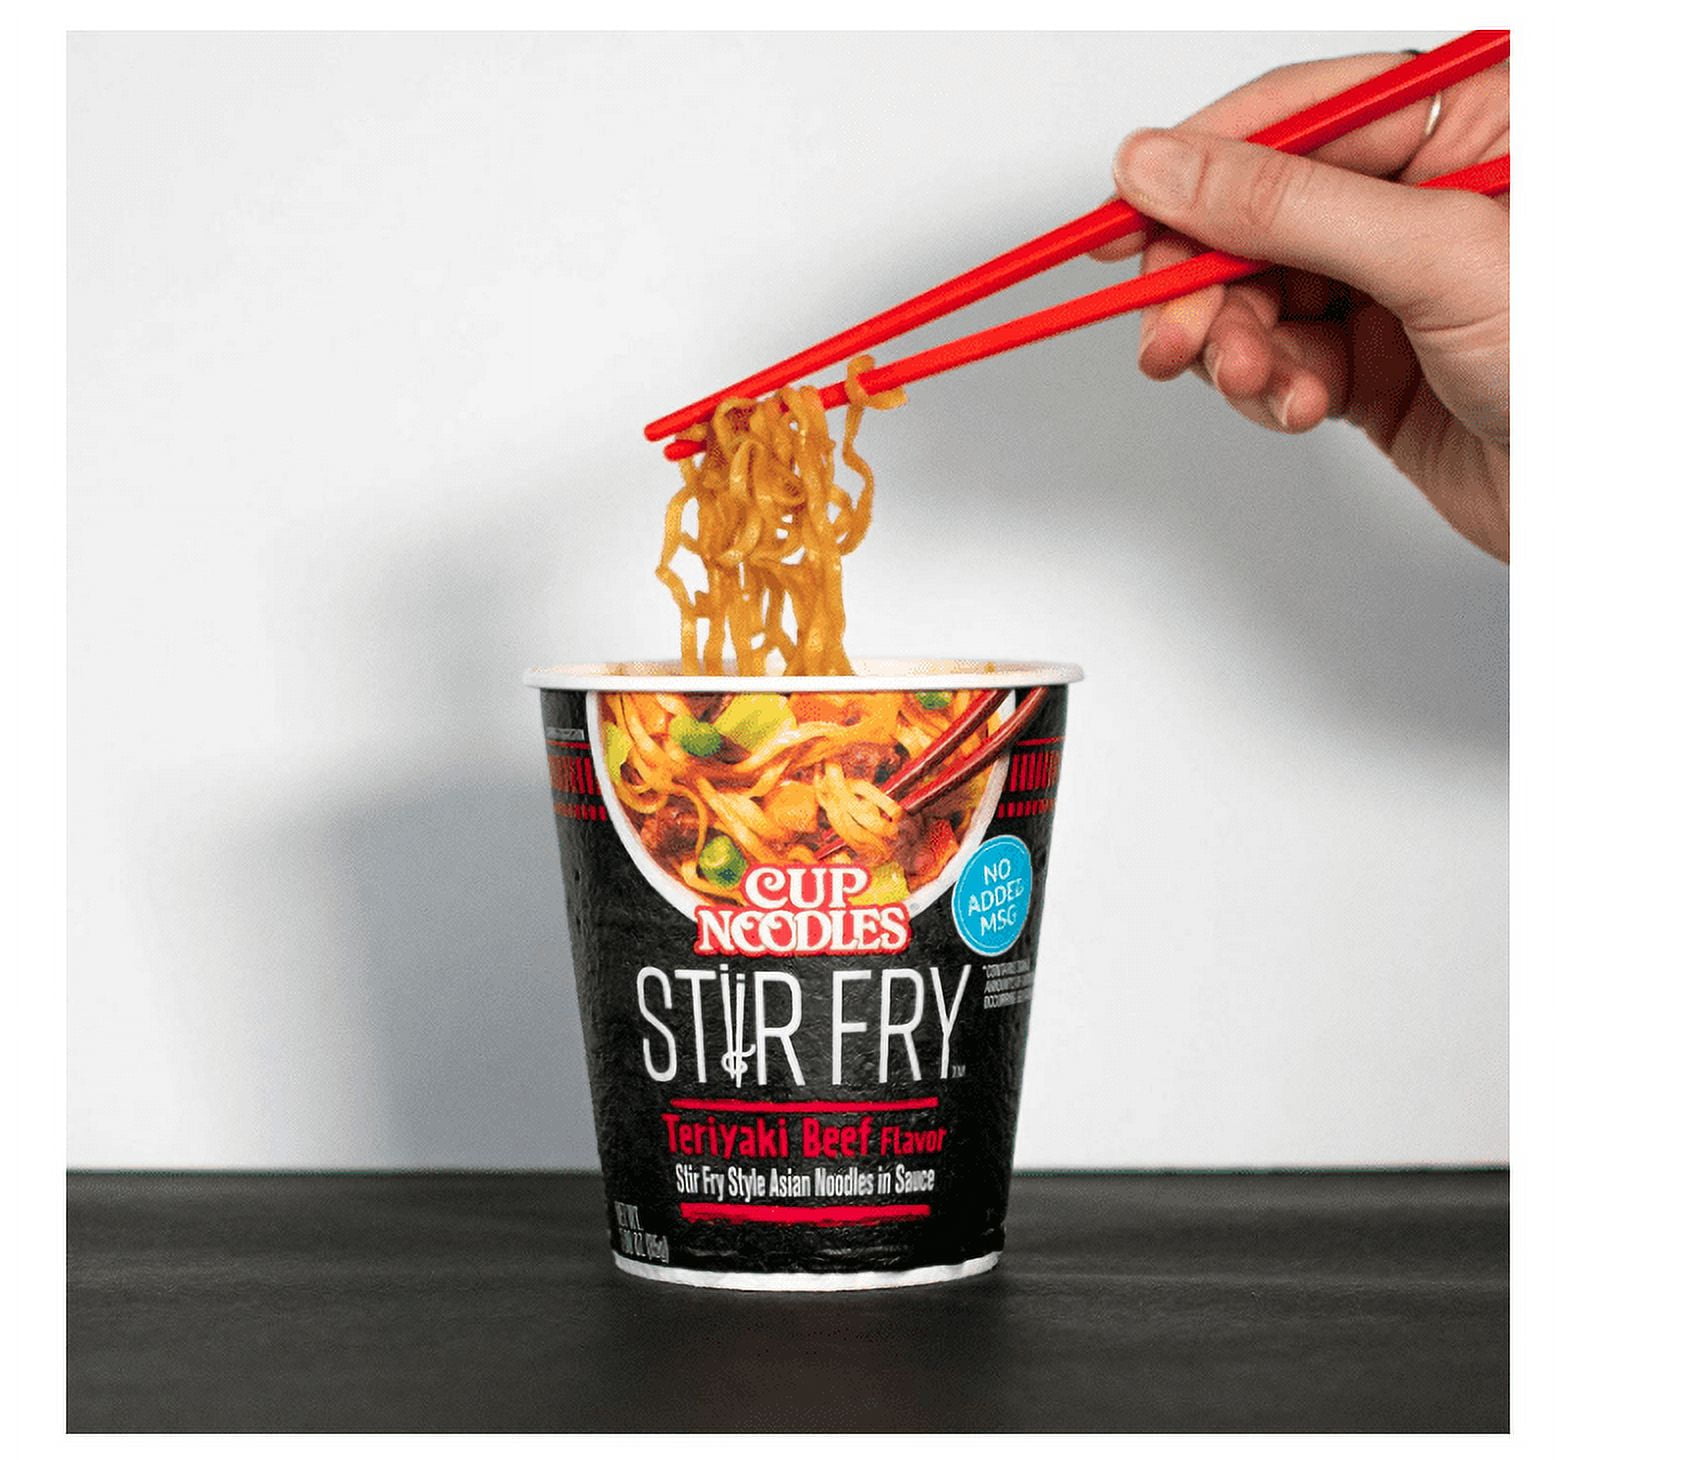 Cup Noodles, king of dollar ramen, tries its hand at stir-fry